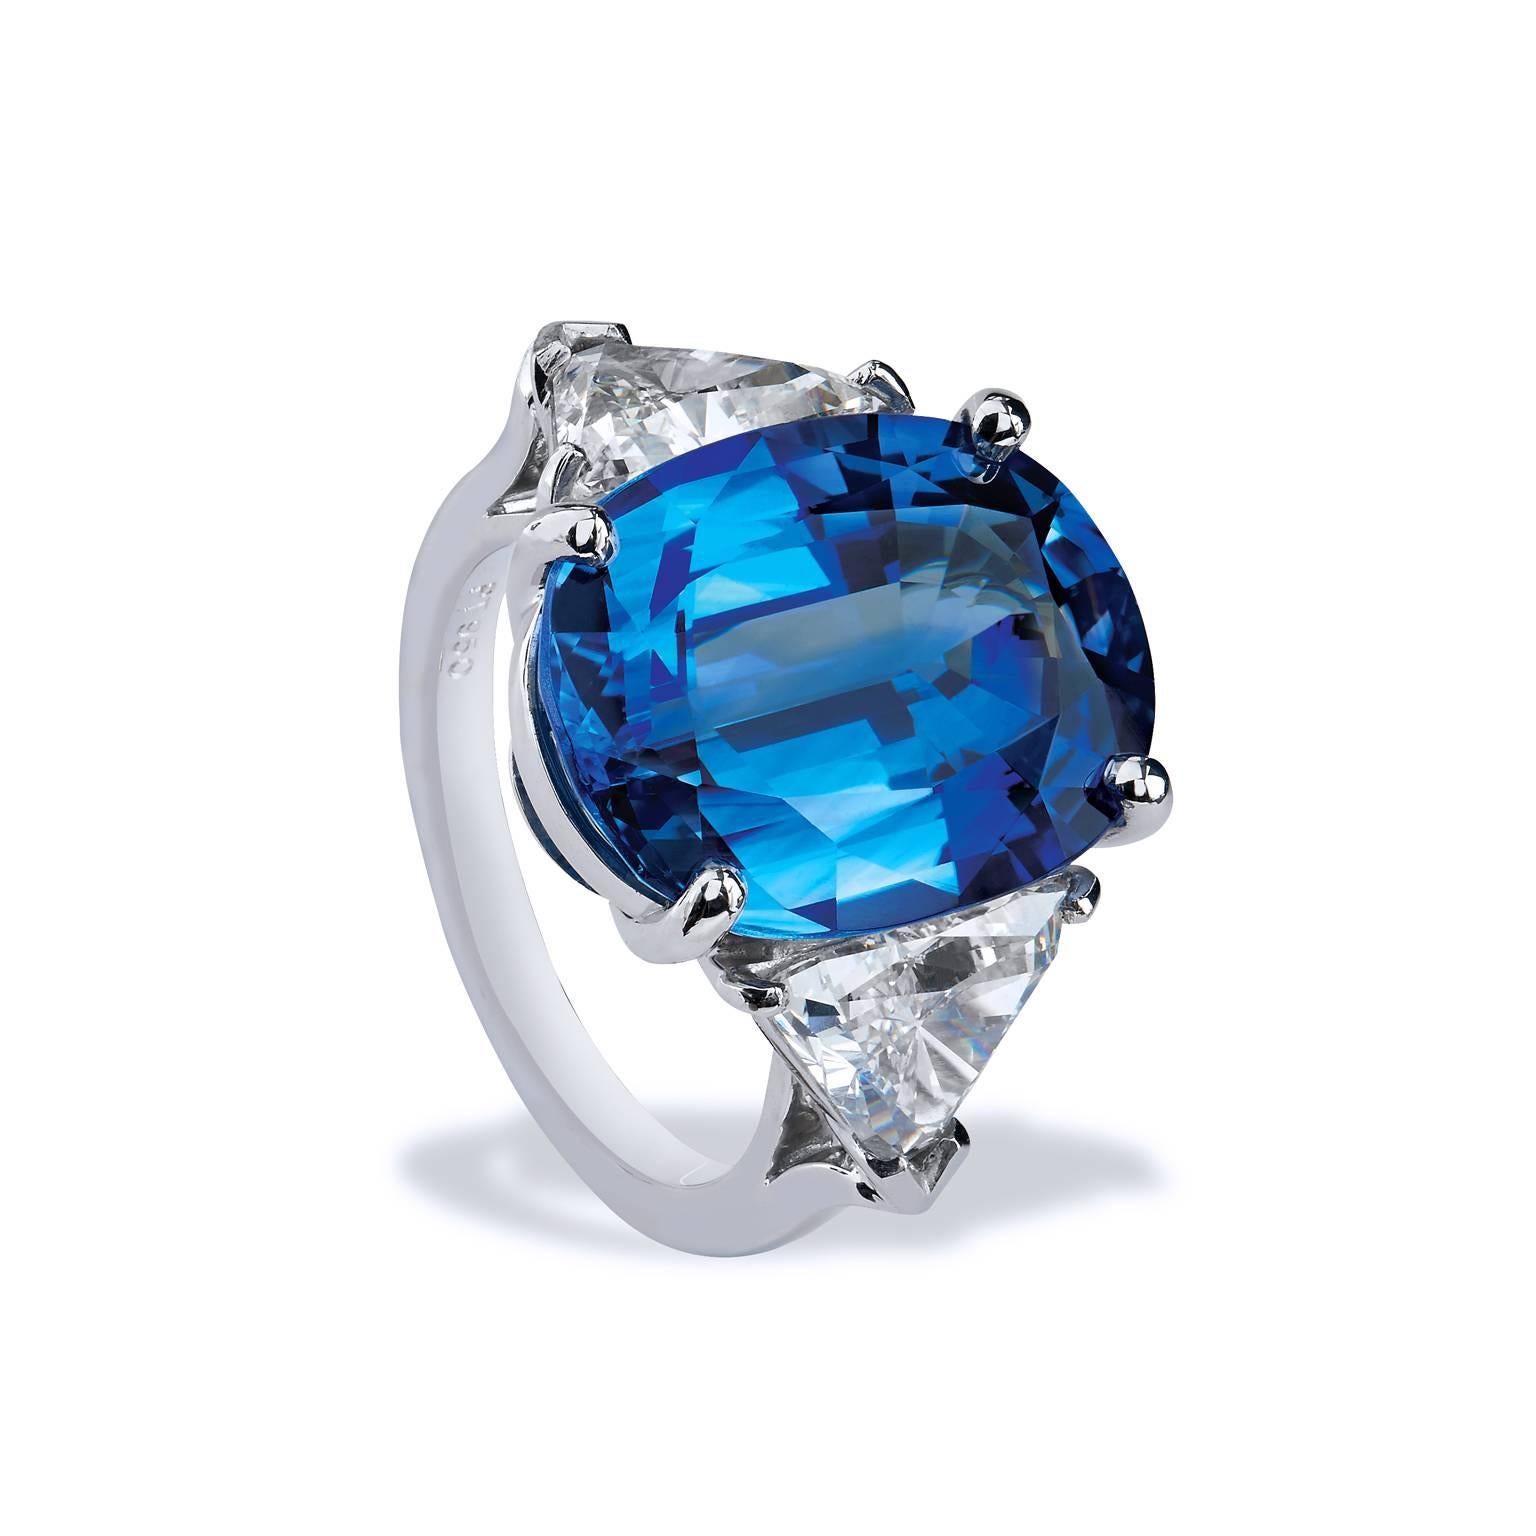 GIA Certified Oval 15.10 Carat Blue Sapphire and Diamond Handmade Platinum Ring

This is a one of a kind, handmade ring created by H&H Jewels. 

The stunning GIA Certified blue sapphire symbolizes loyalty and its color is associated with all that is